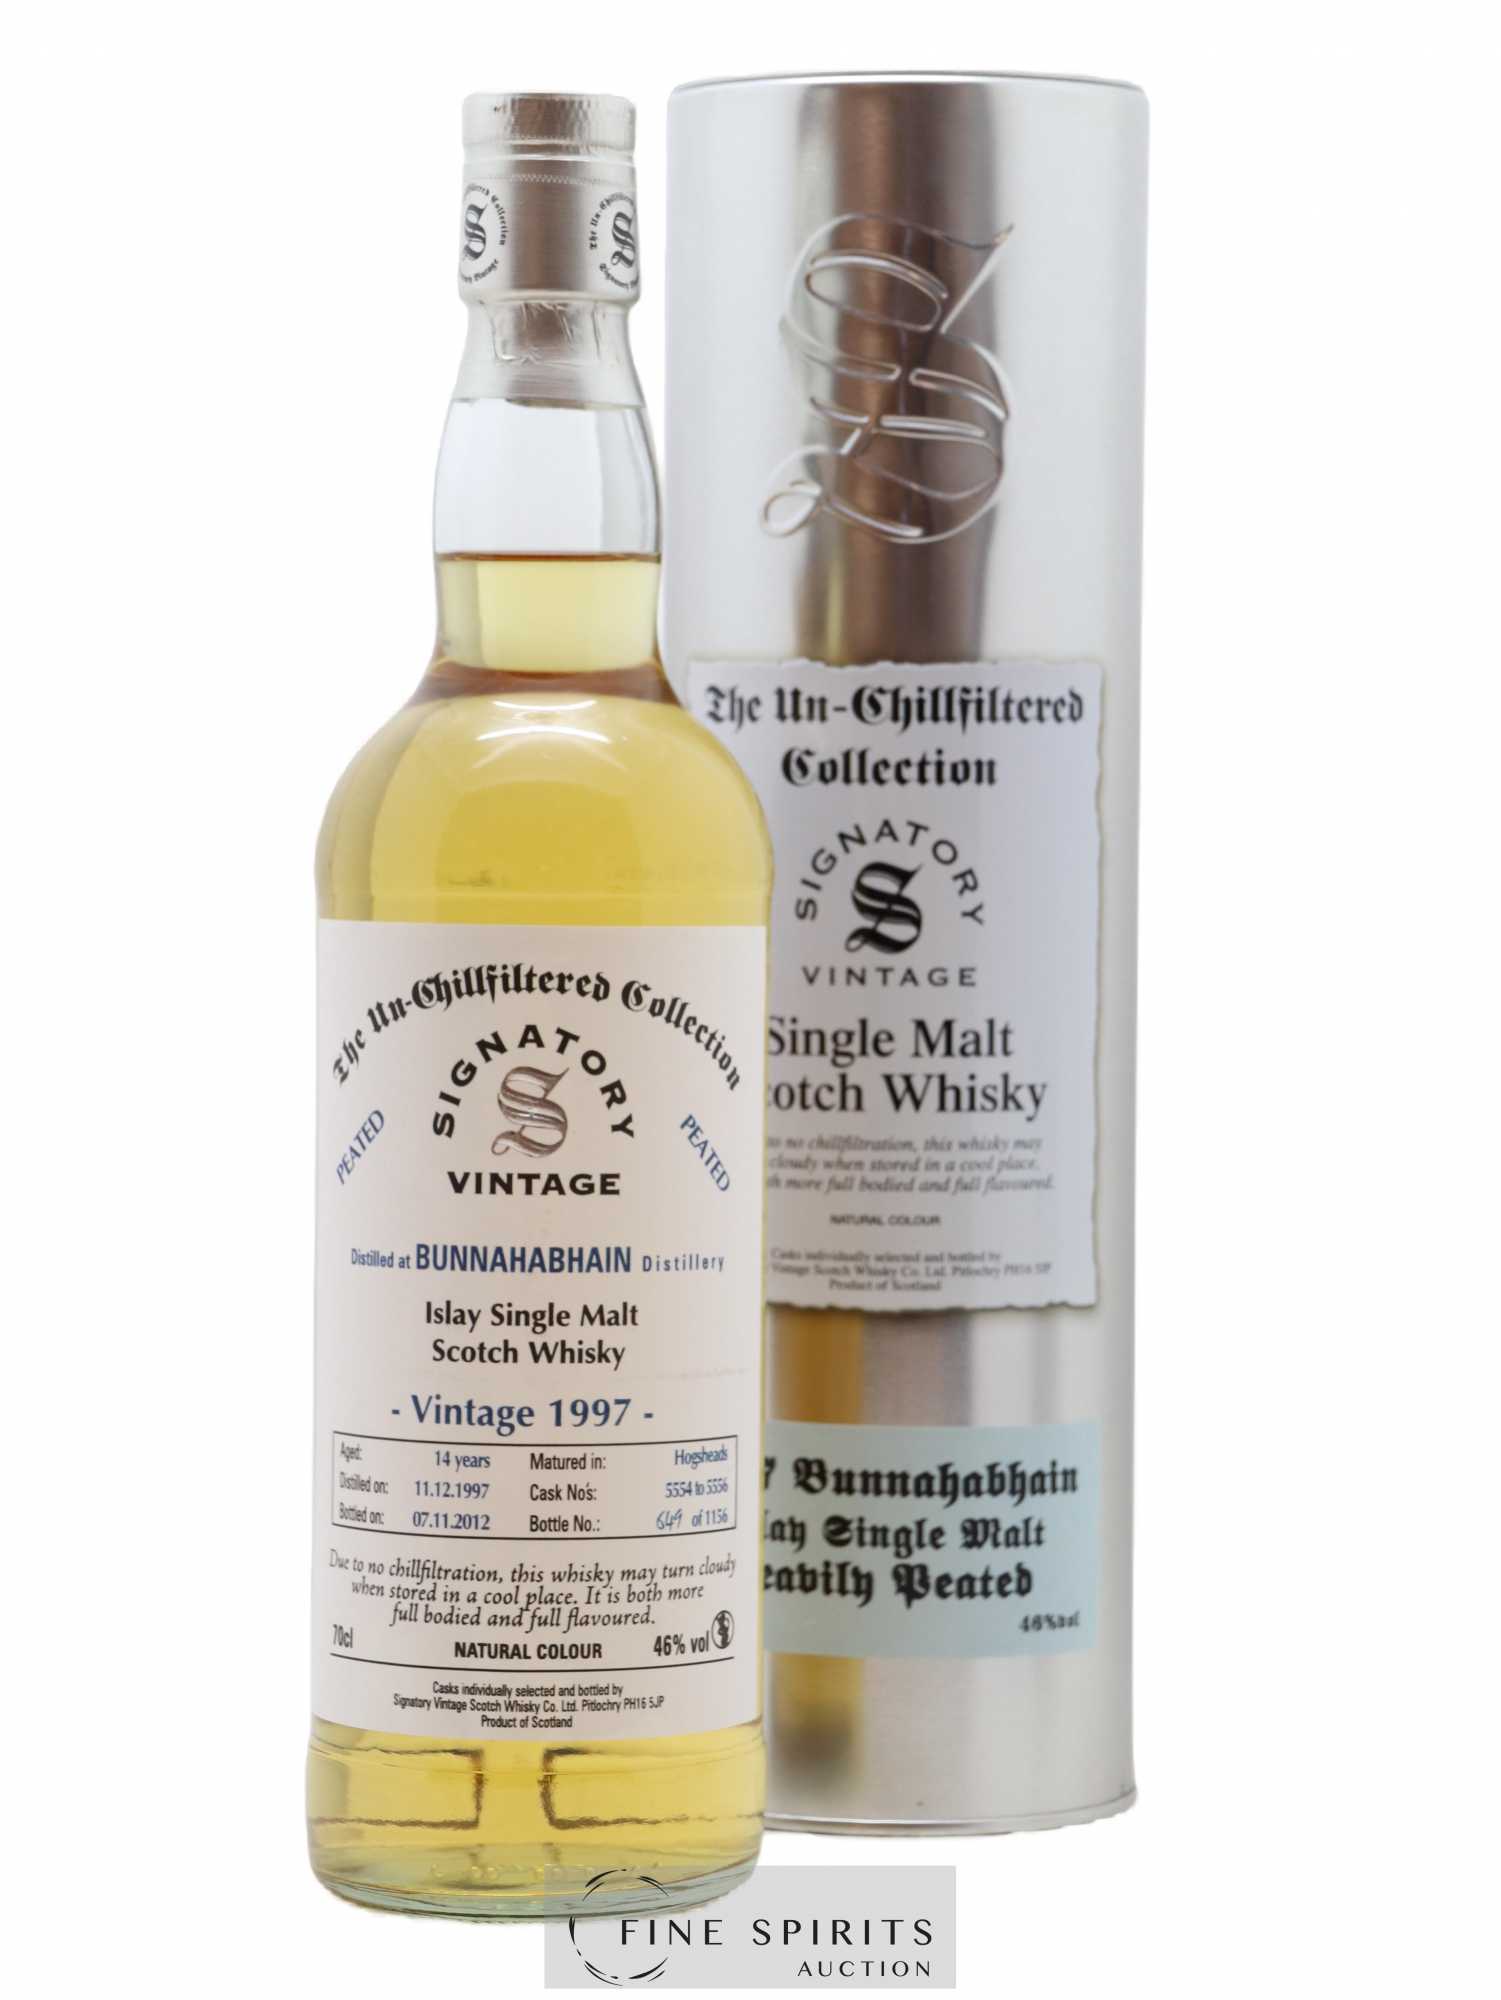 Bunnahabhain 14 years 1997 Signatory Vintage Peated Hogsheads Casks n°5554 to 5556 - One of 1156 - bottled 2012 The Un-Chillfiltered Collection